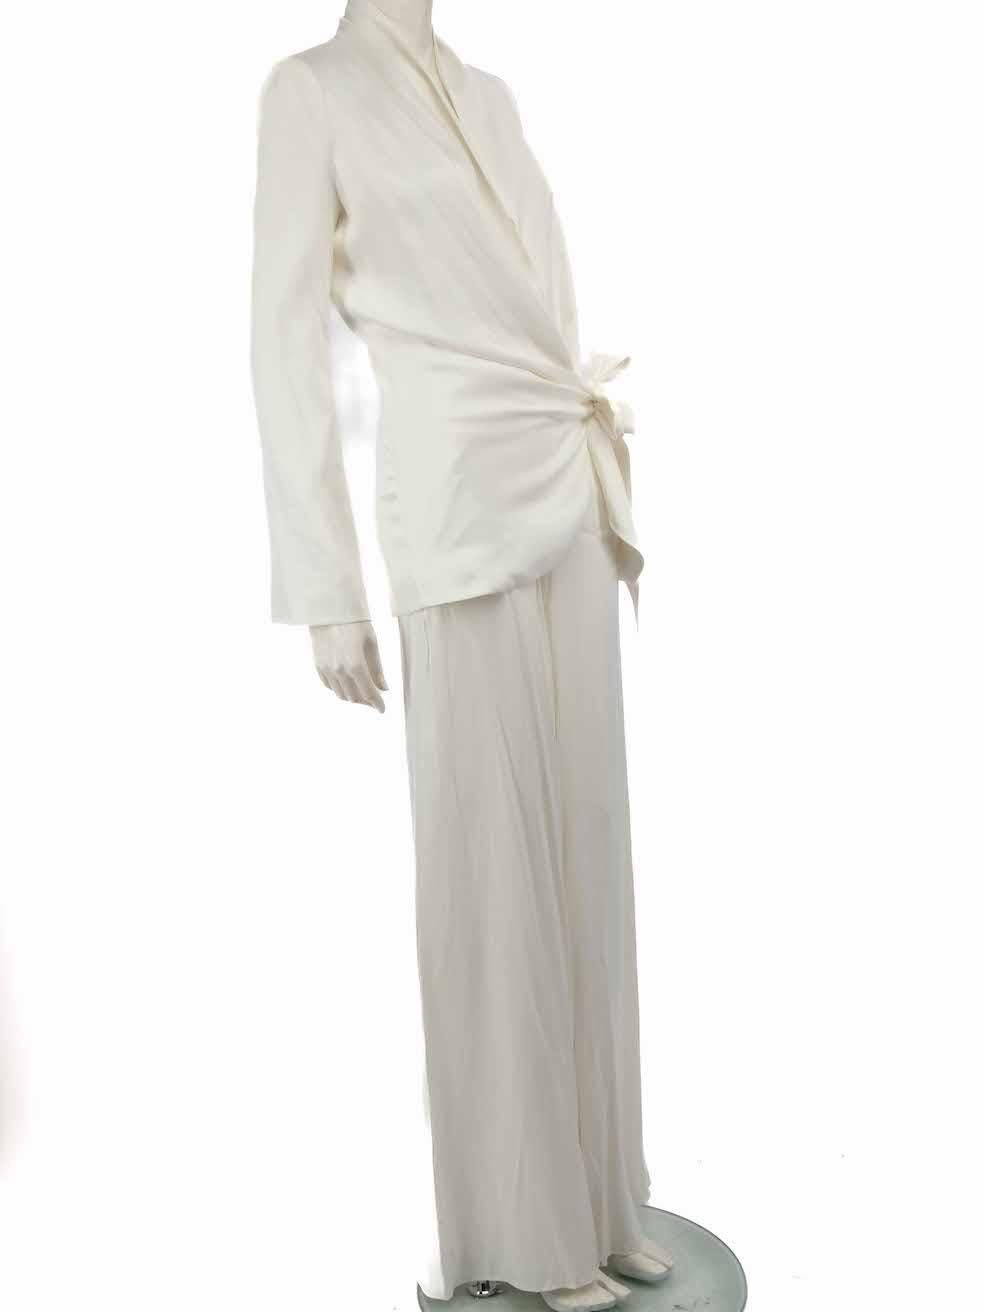 CONDITION is Never worn, with tags. No visible wear to set is evident on this new Rat & Boa designer resale item.
 
 
 
 Details
 
 
 White
 
 Cupro
 
 Suit set
 
 Long sleeve blazer
 
 Tie fastening
 
 Shoulder pads
 
 Wide leg trousers
 
 2x Side